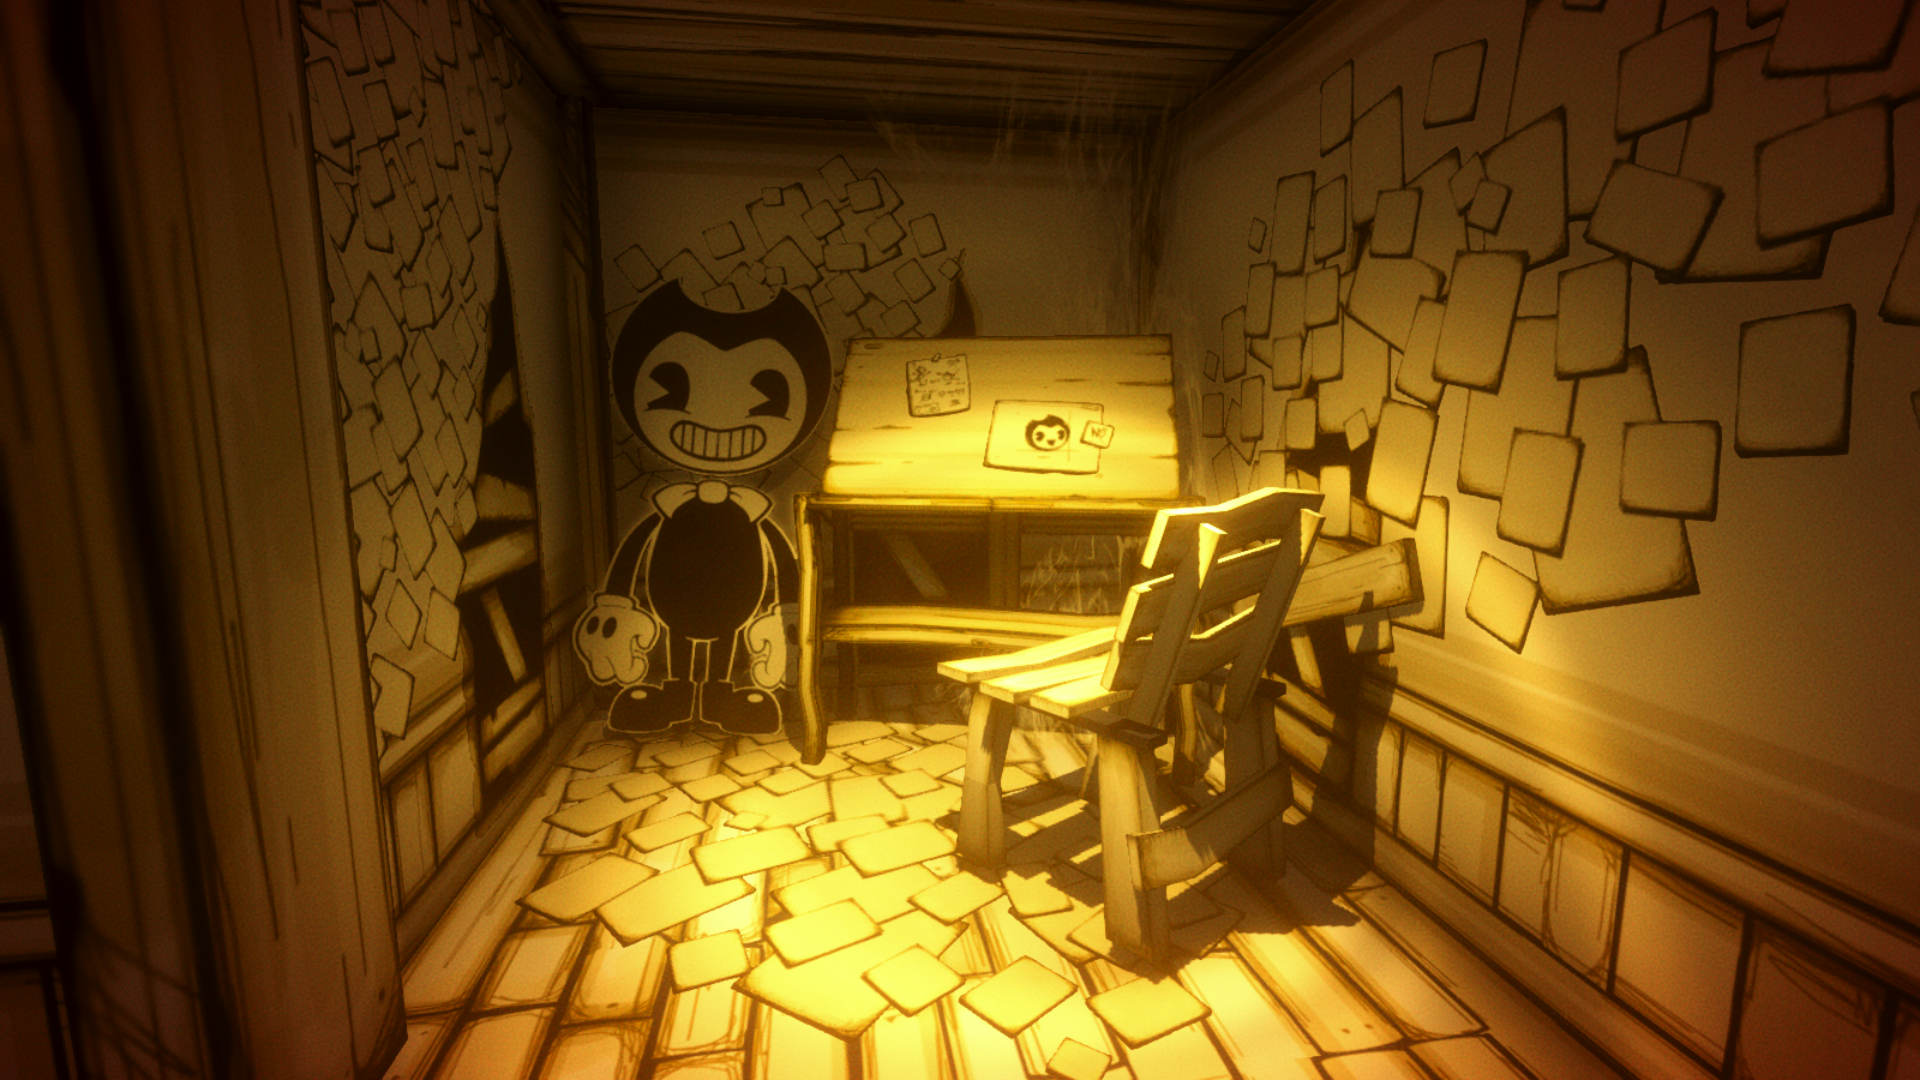 Bendy And The Ink Machine, Video Games, Jump Scare, Character, Themeatly  Games, Joey Drew Studios, Drawing, Cartoon transparent background PNG  clipart